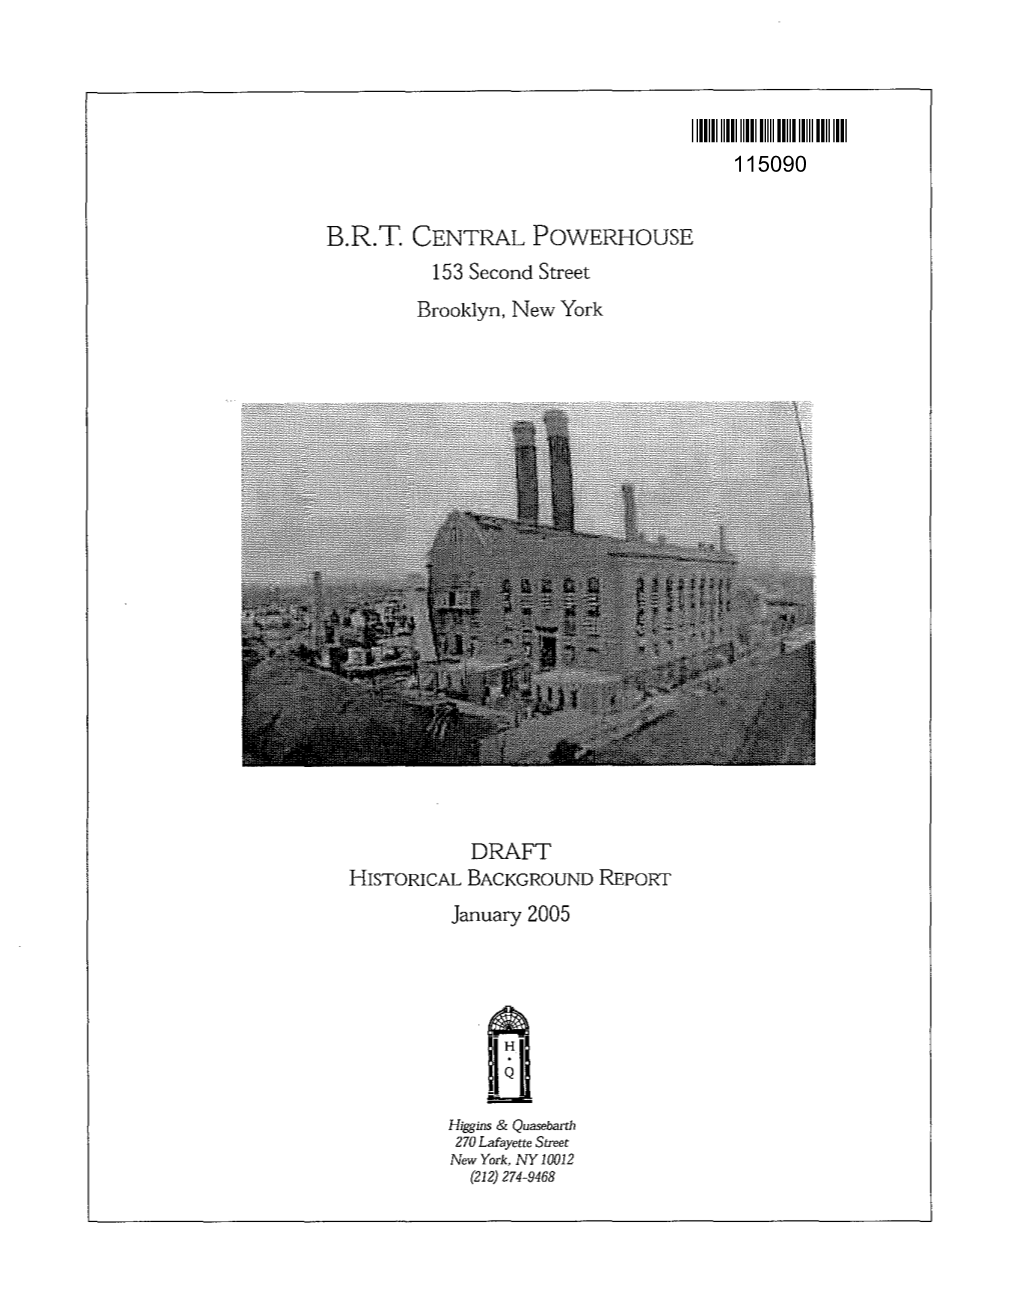 Draft, Historical Background Report, B.R.T. Central